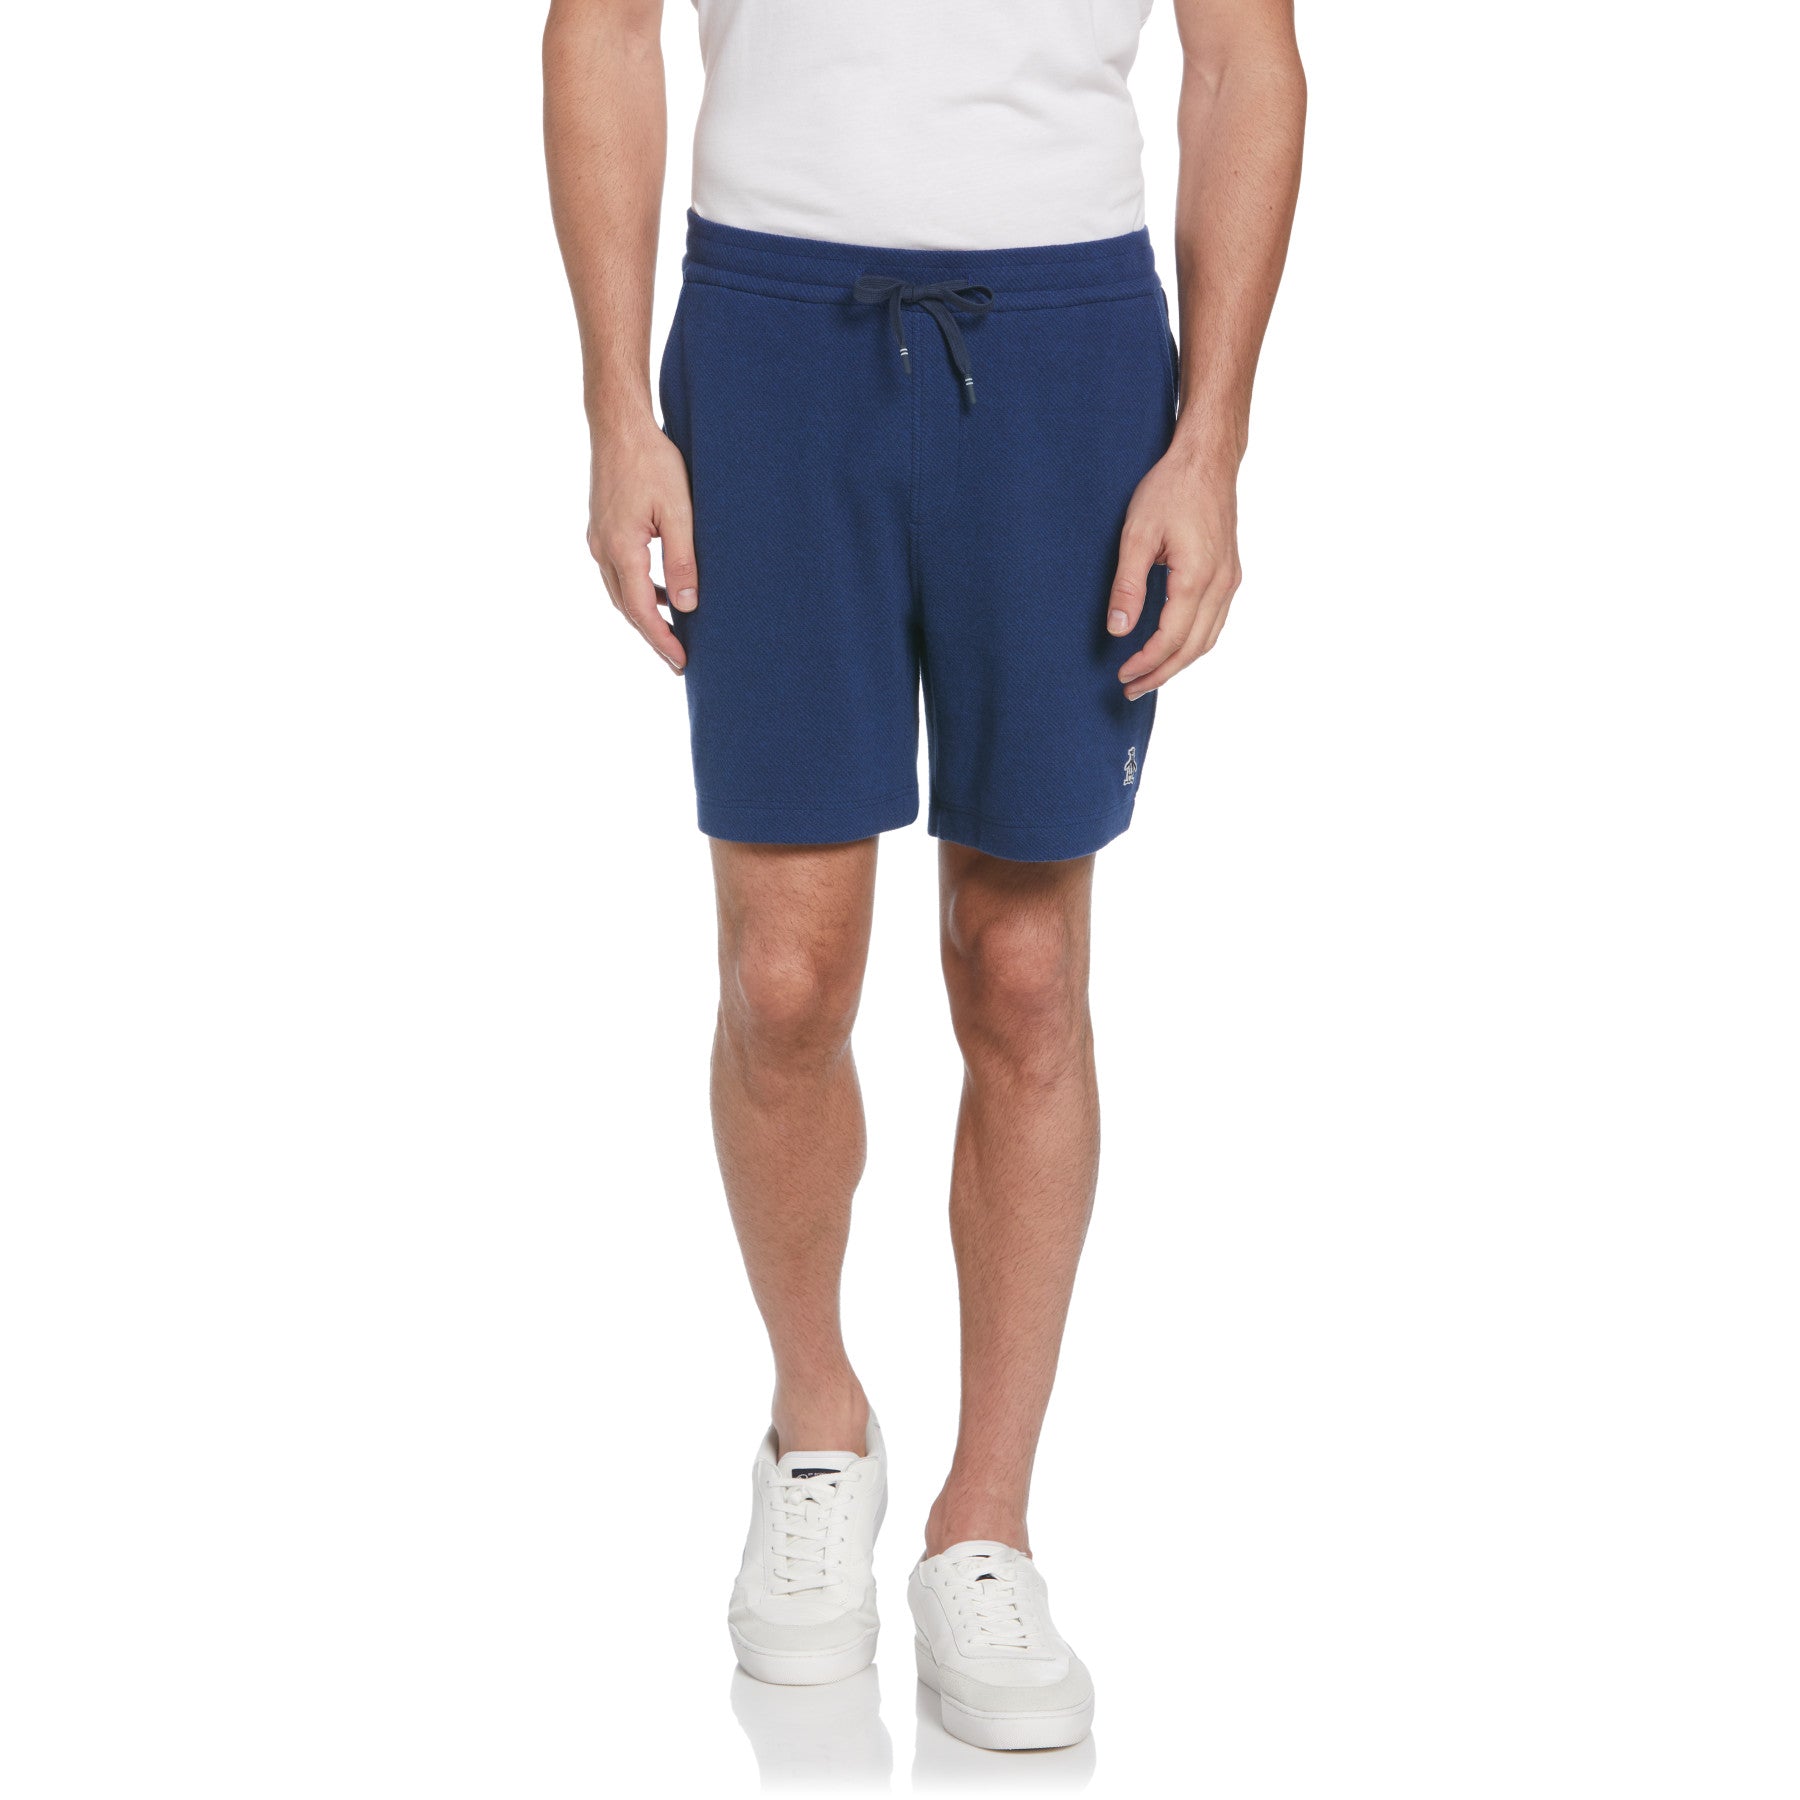 View Soft Touch Twill Track Shorts In Dress Blues information